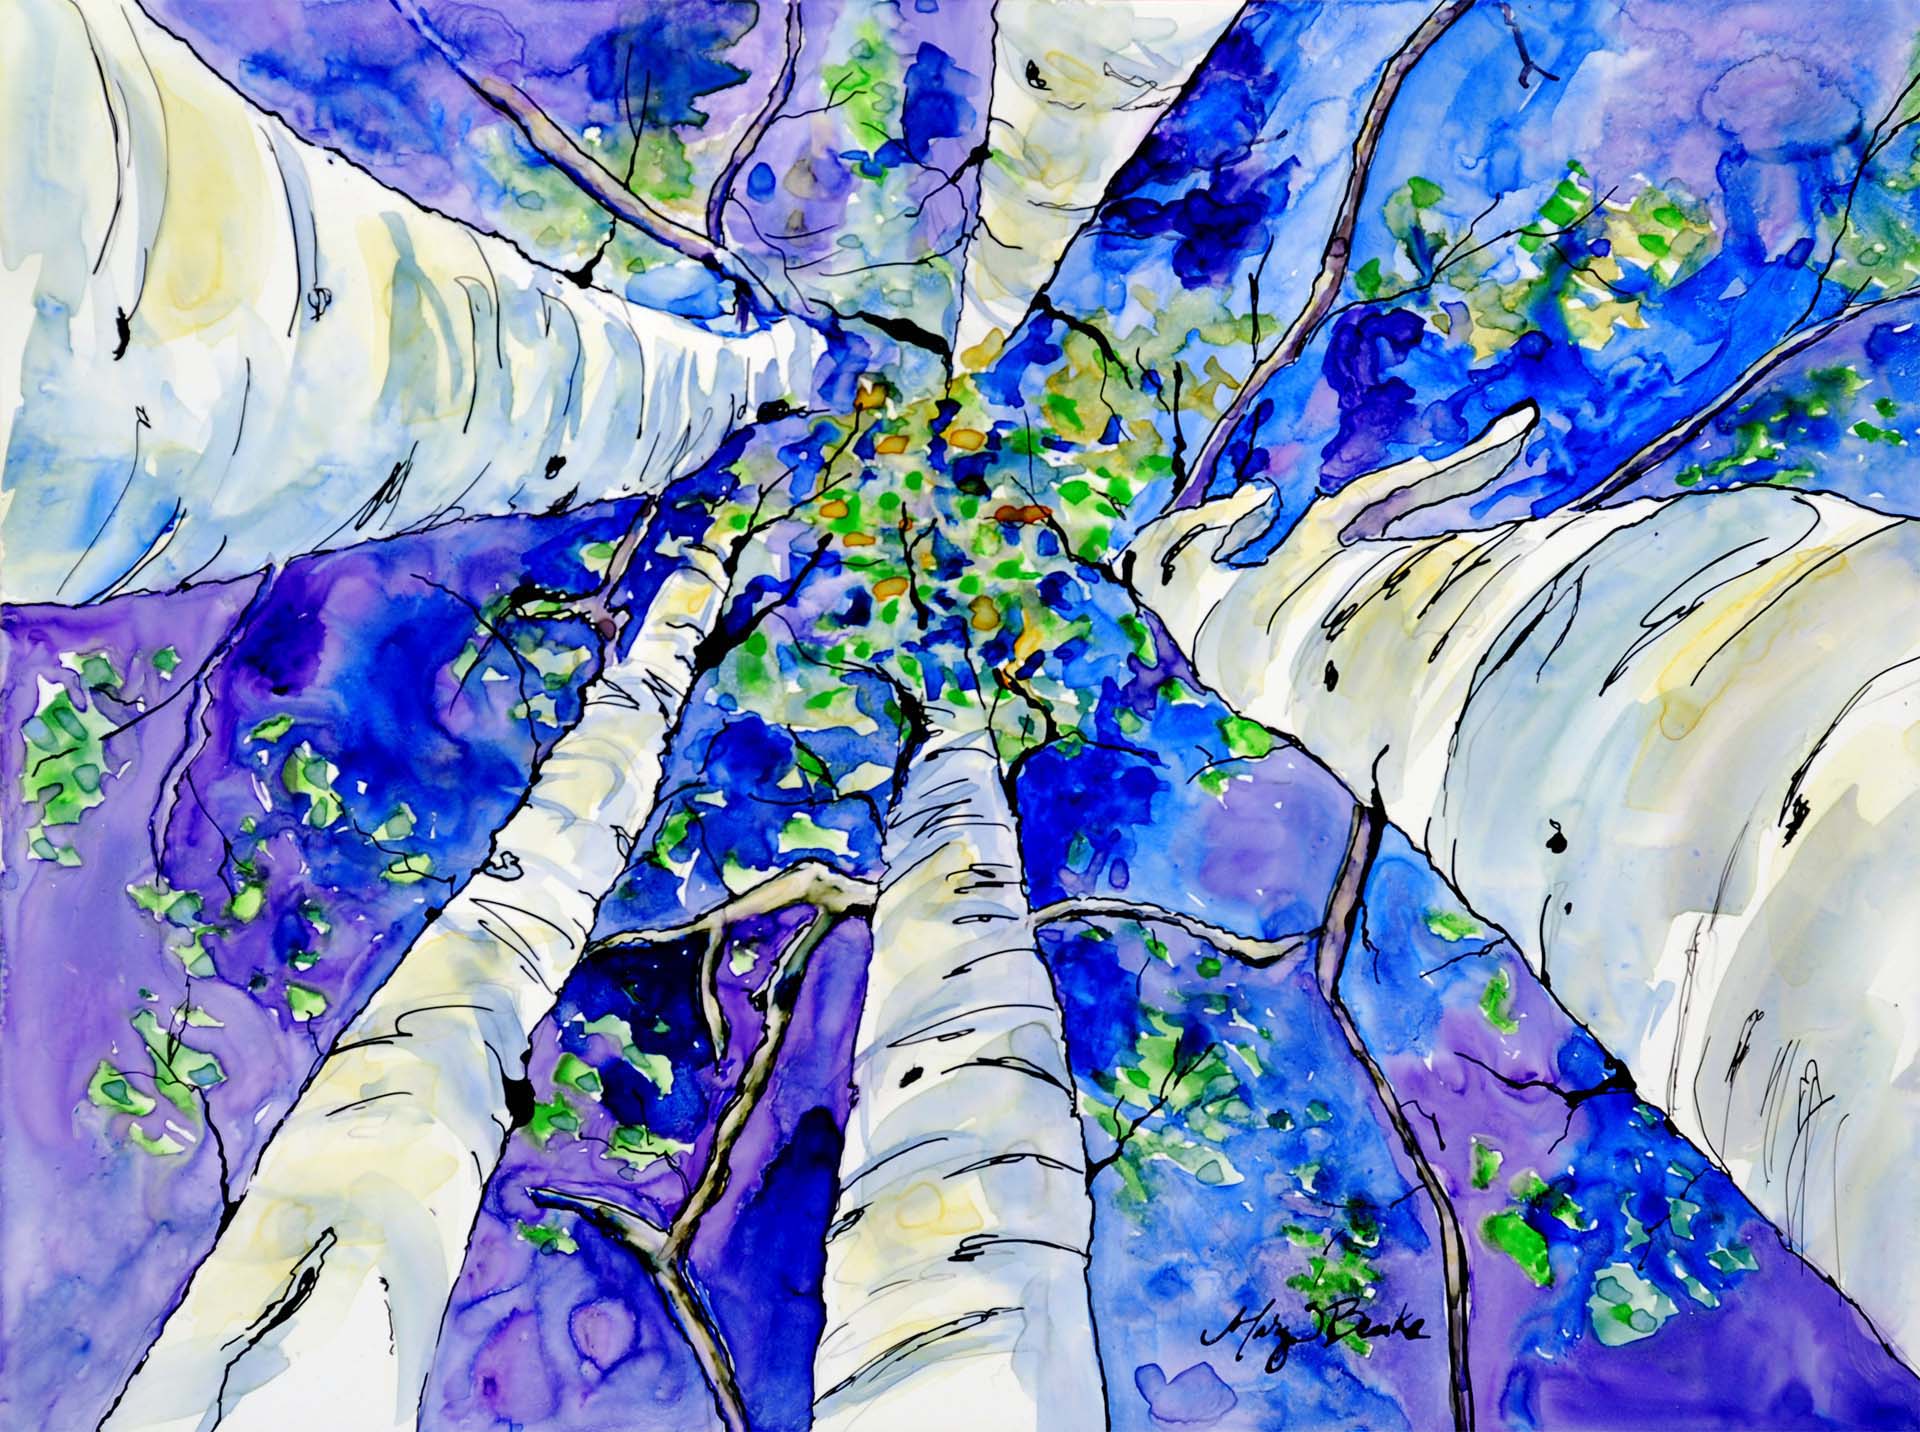 A "skyward" view looking up through aspen trees to a blue/violet sky painted in watercolor and ink on Yupo paper by Mary Benke